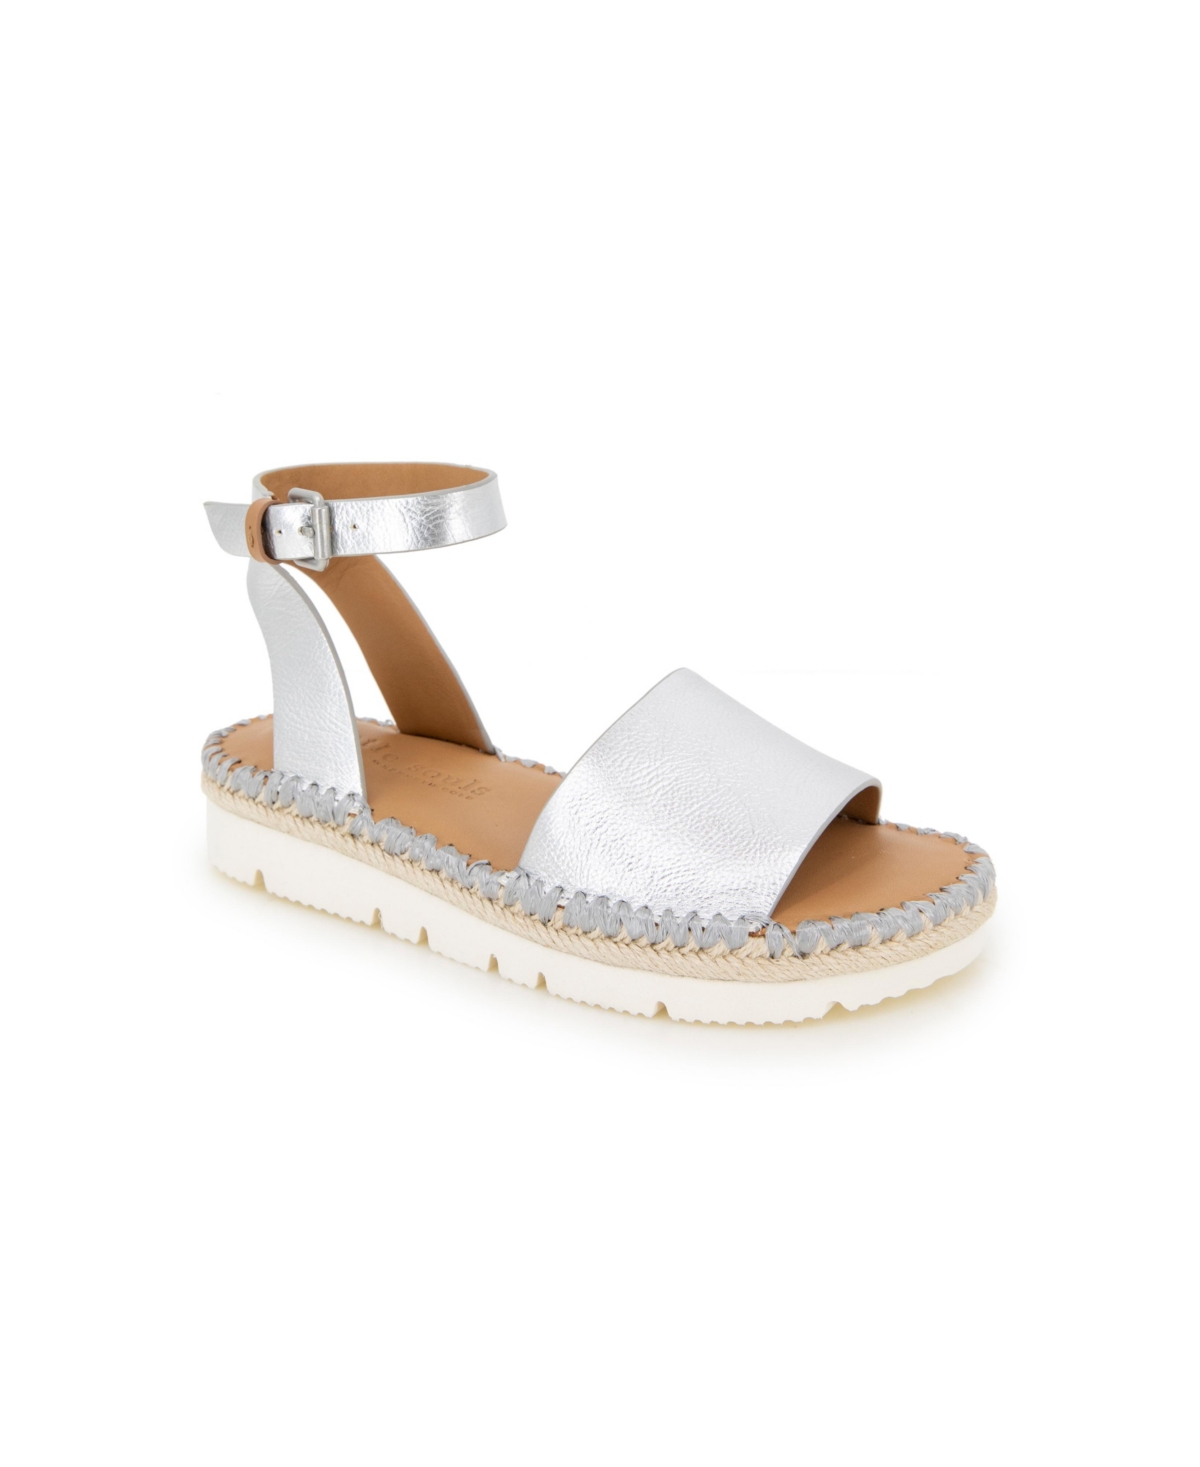 Women's Lucille Buckle Sandal - Luggage Leather